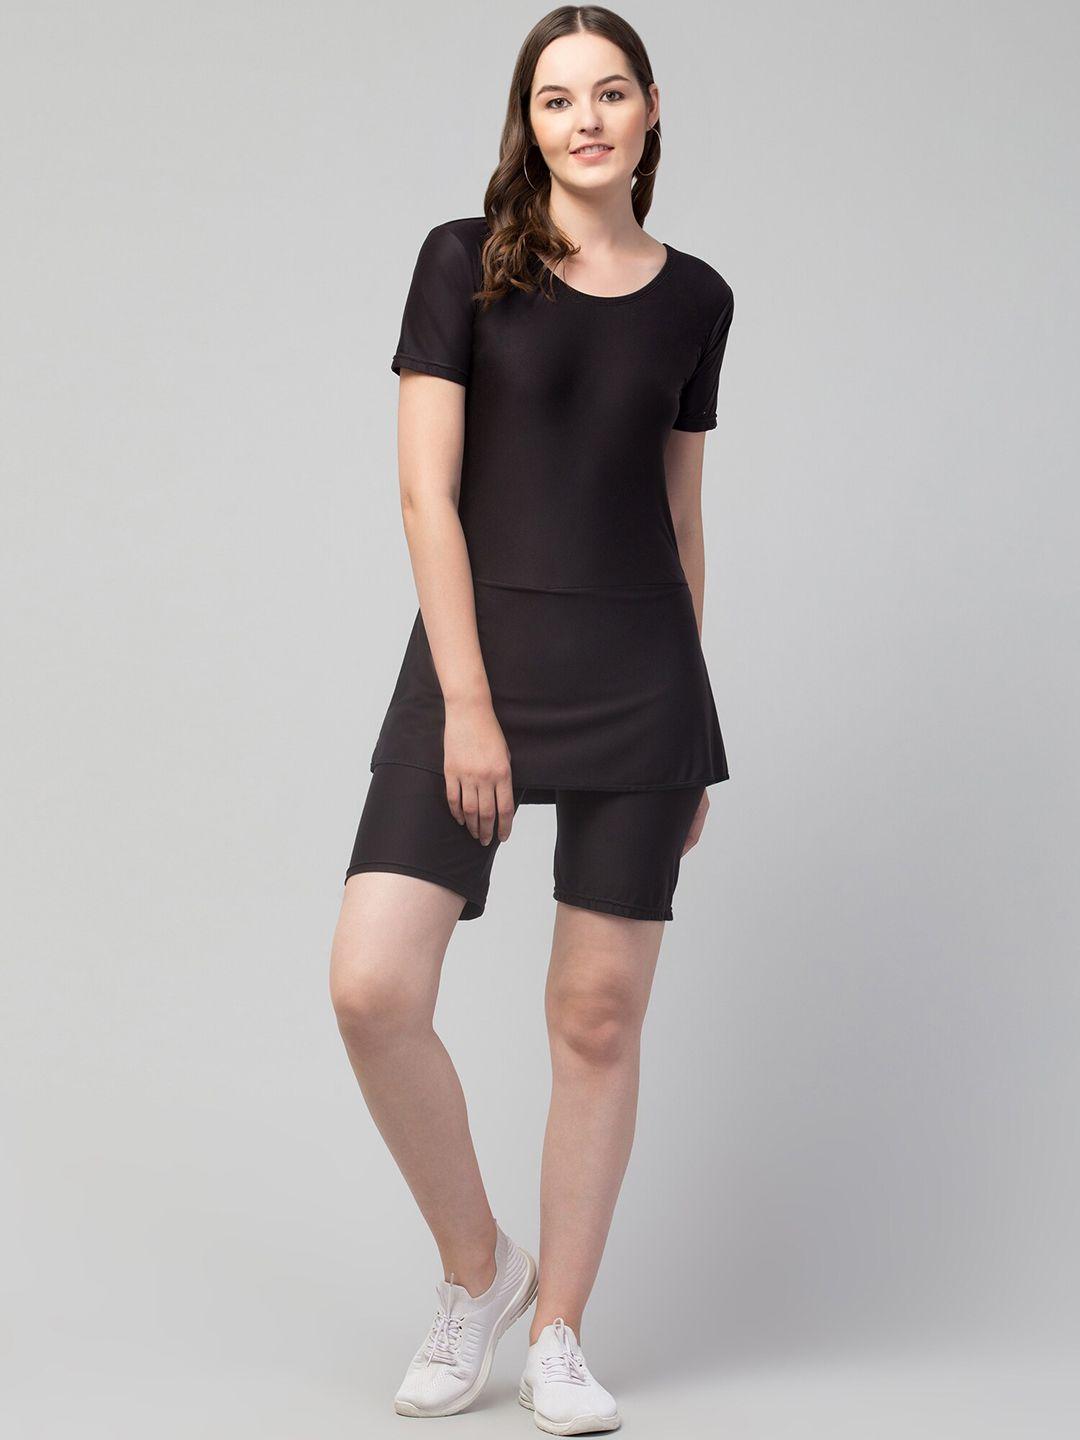 apraa-&-parma-swimming-dress-with-attached-shorts